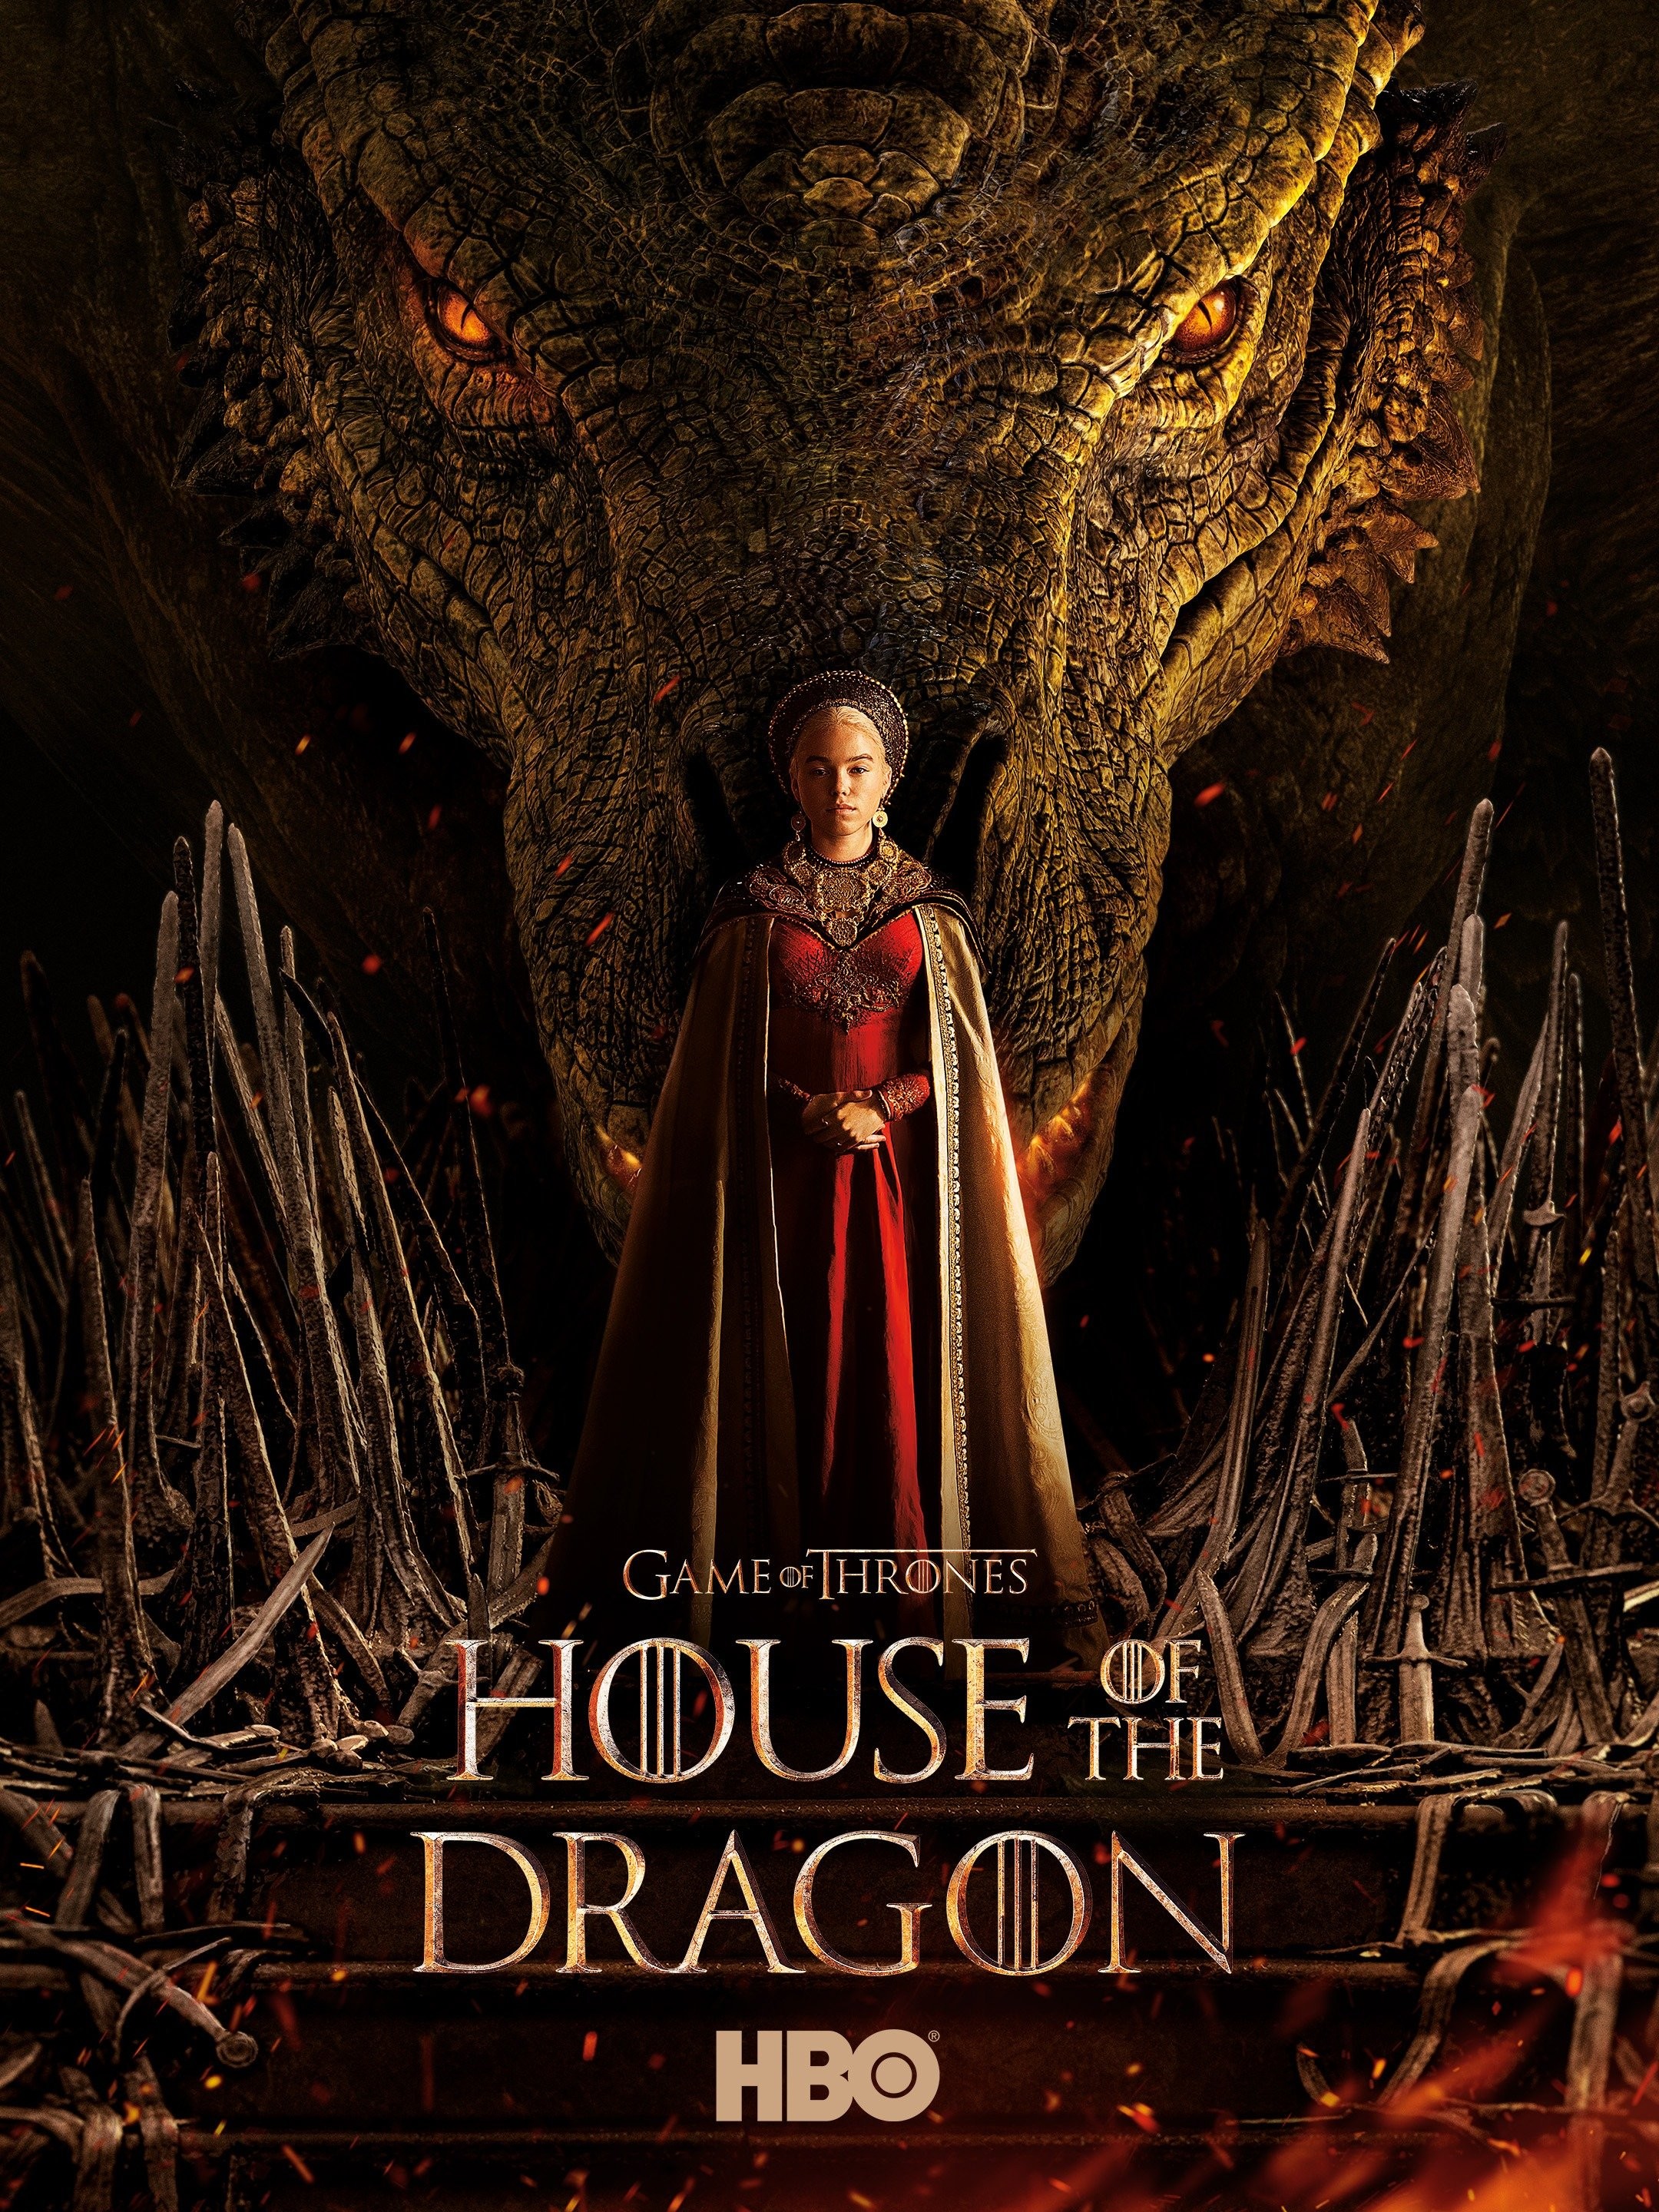 Why 'House of the Dragon' Episode 7 Was So Dark